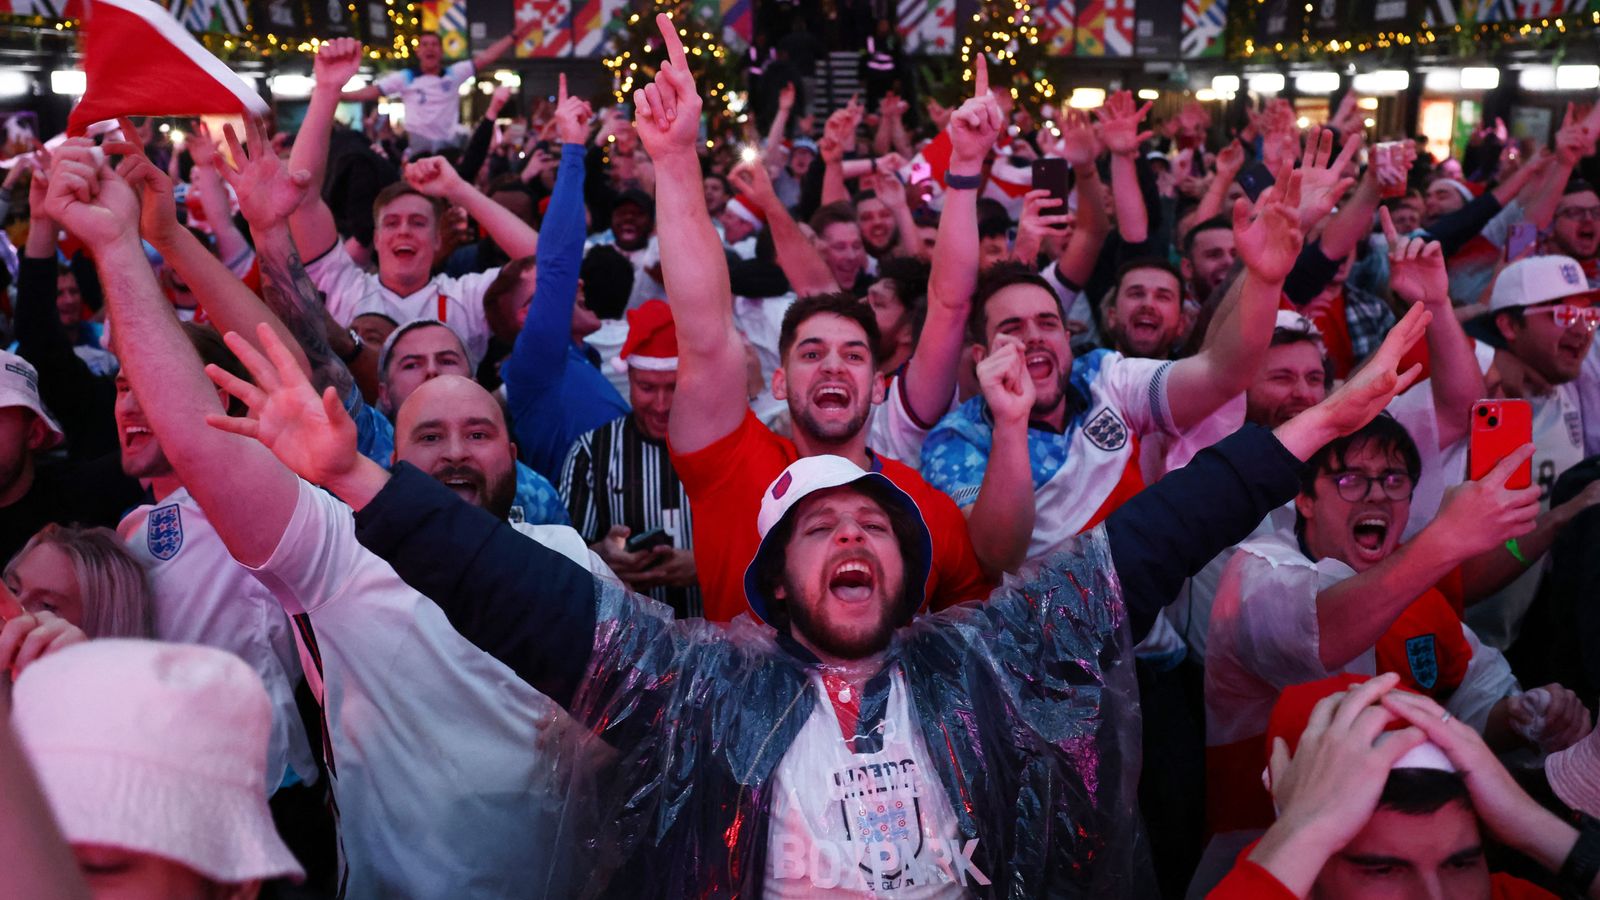 In pictures: England fans celebrate convincing World Cup victory over Senegal